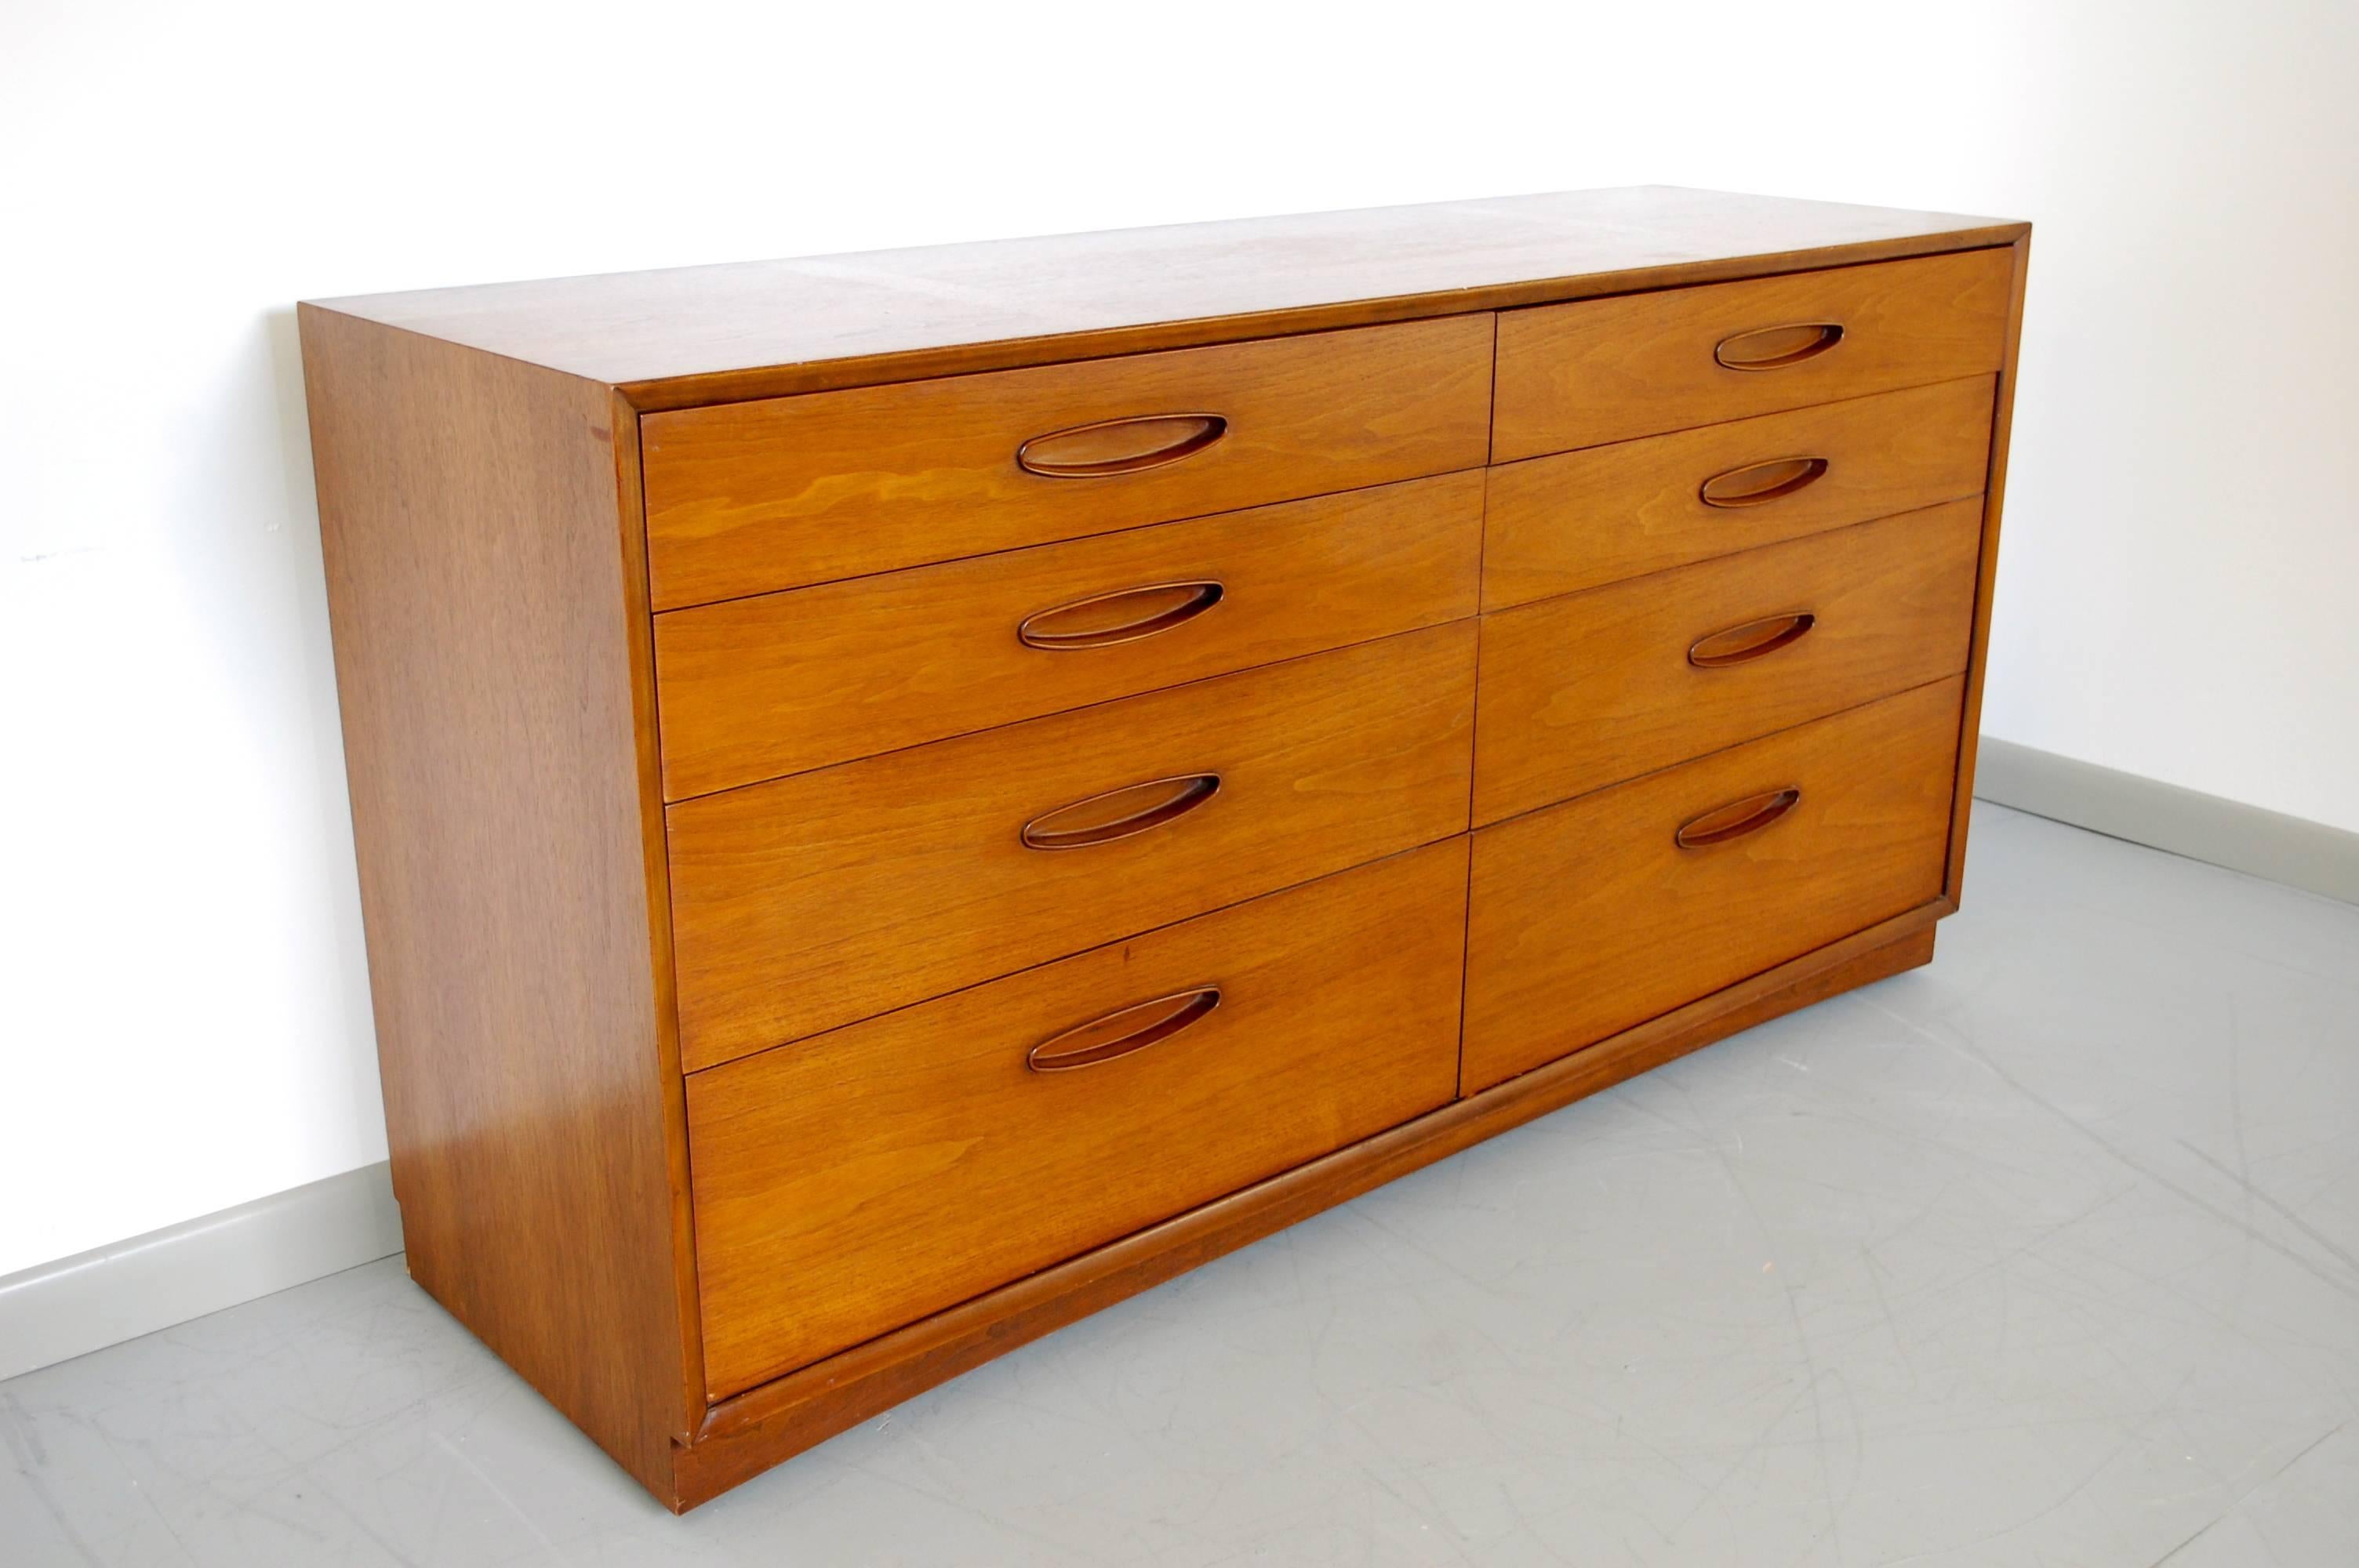 Fantastic Mid-Century Modern eight-drawer walnut dresser by Henredon for their, circa 1960 line. Danish modern influence, beautiful wood grain, clean lines, recessed wood pulls and concealed casters underneath.